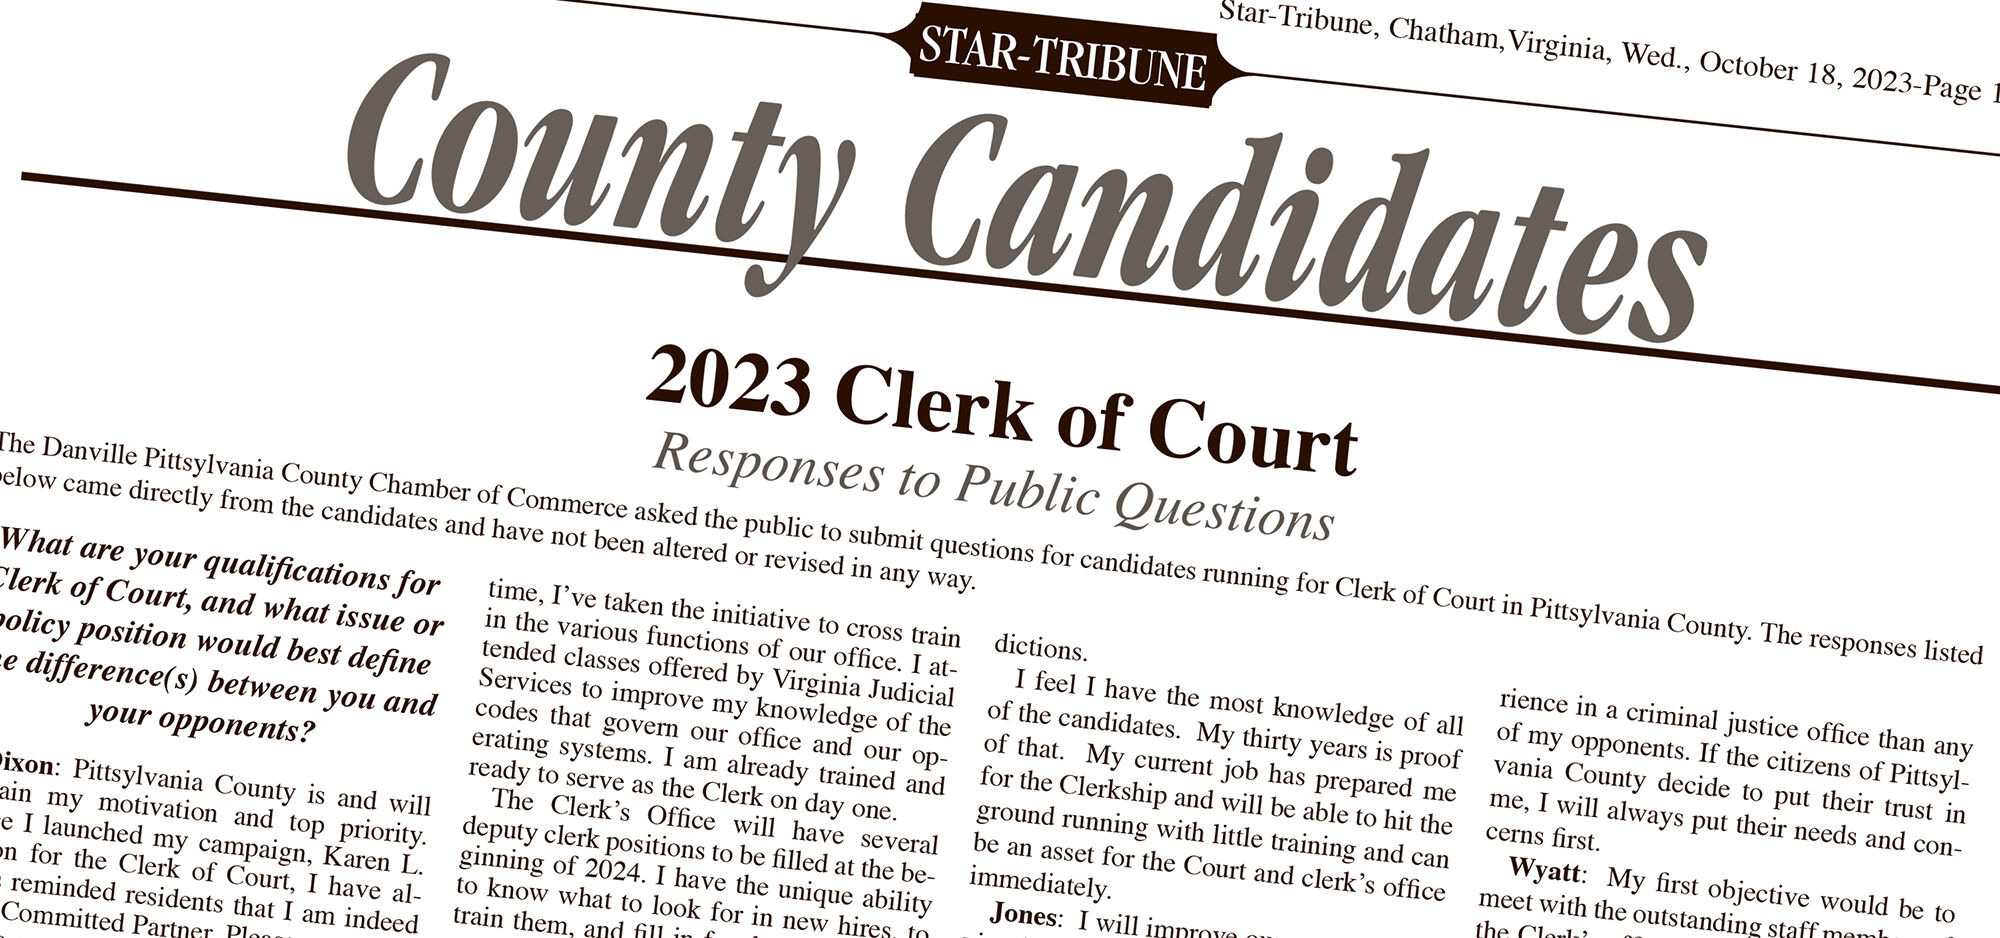 County Candidates: Responses to Public Questions, News